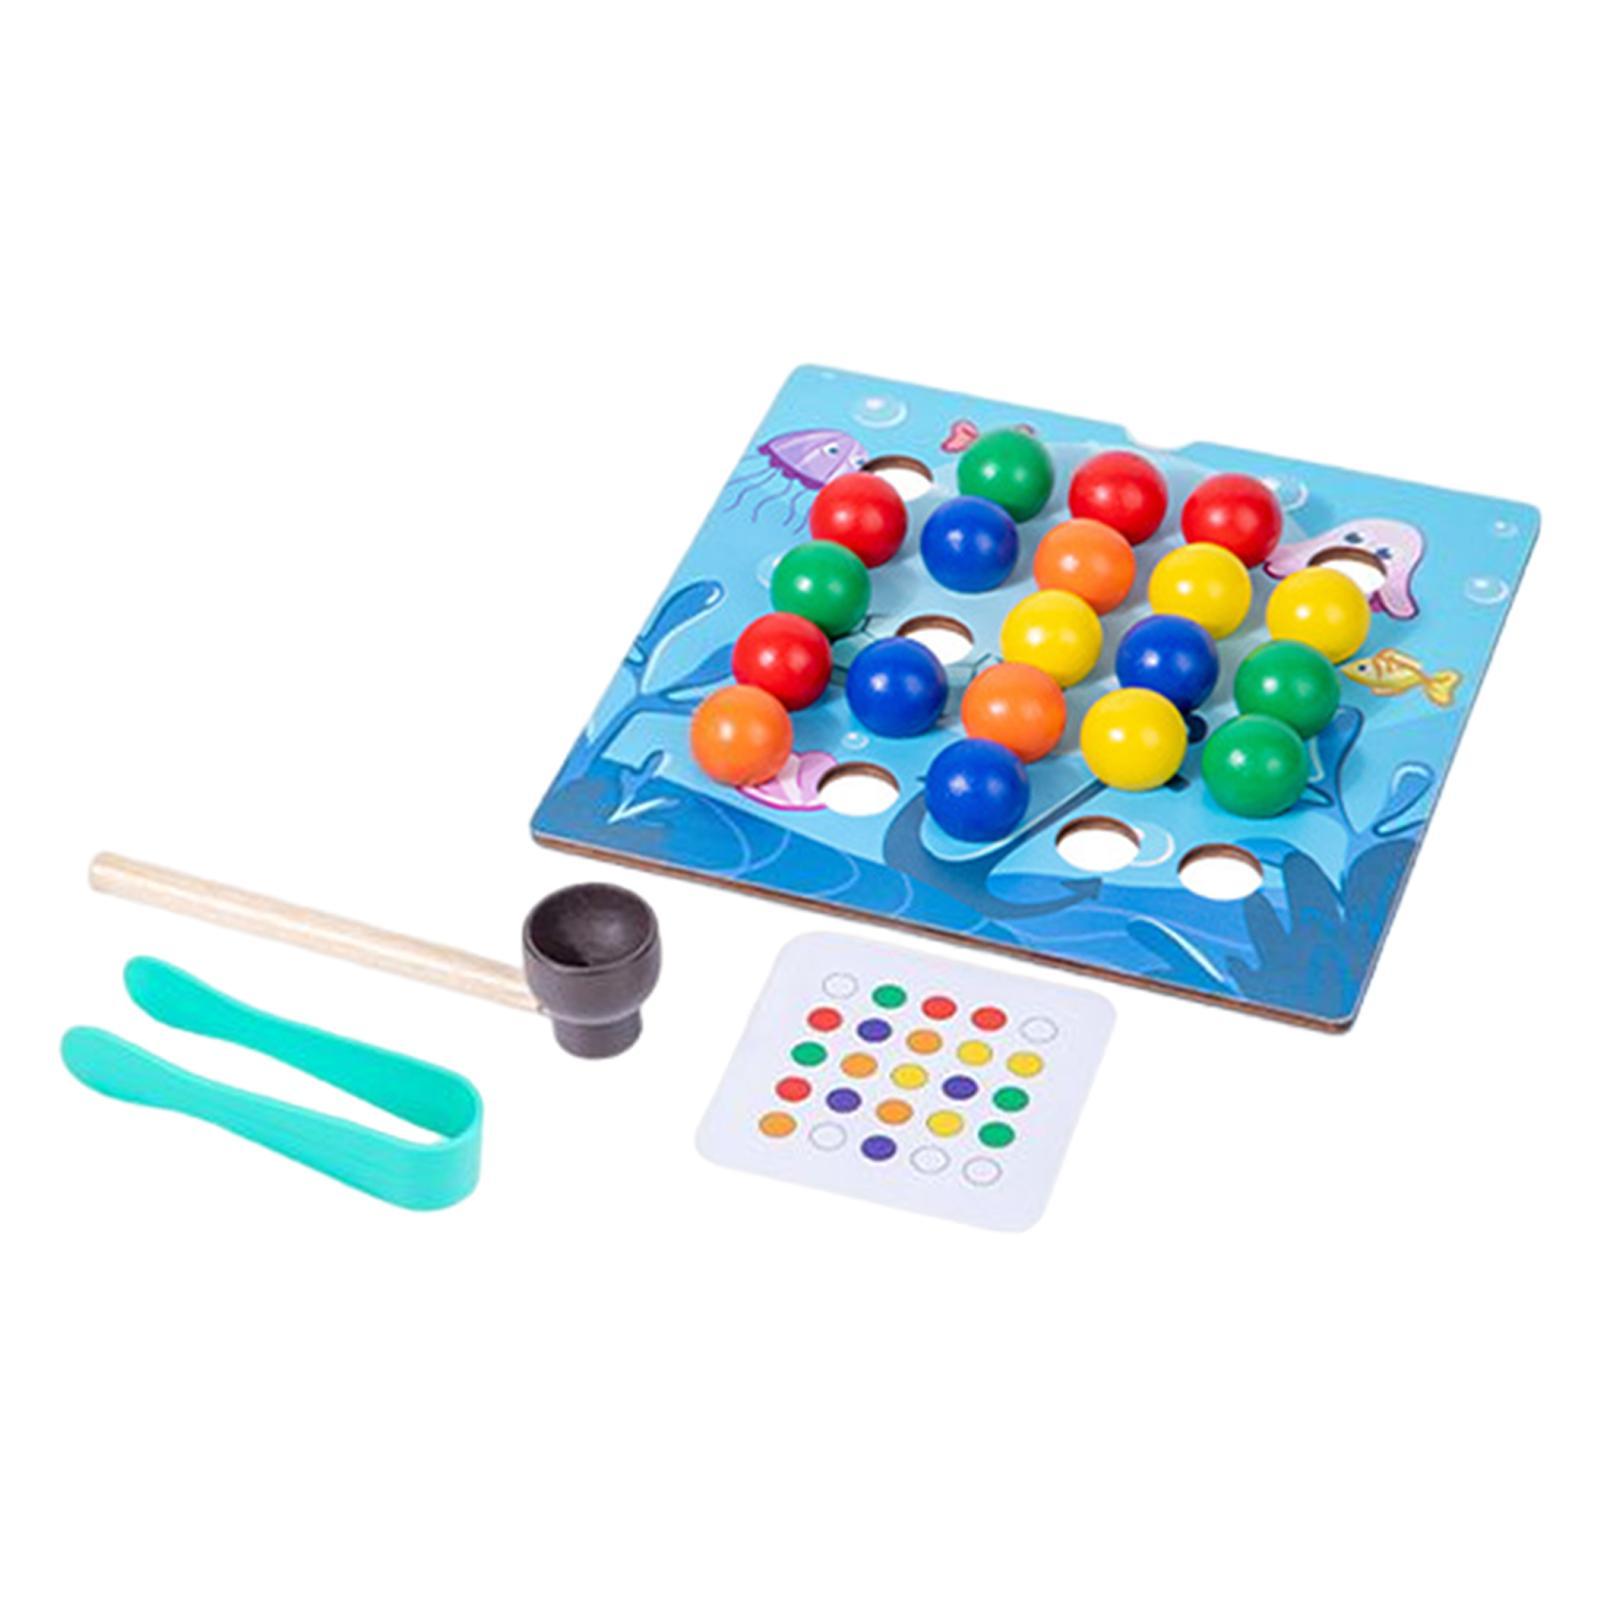 Wooden Puzzle Sorting Stacking color Sorting Matching Fine Motor Skill Learning Toy Clip Beads Game for Role Play Activity Indoor Gift